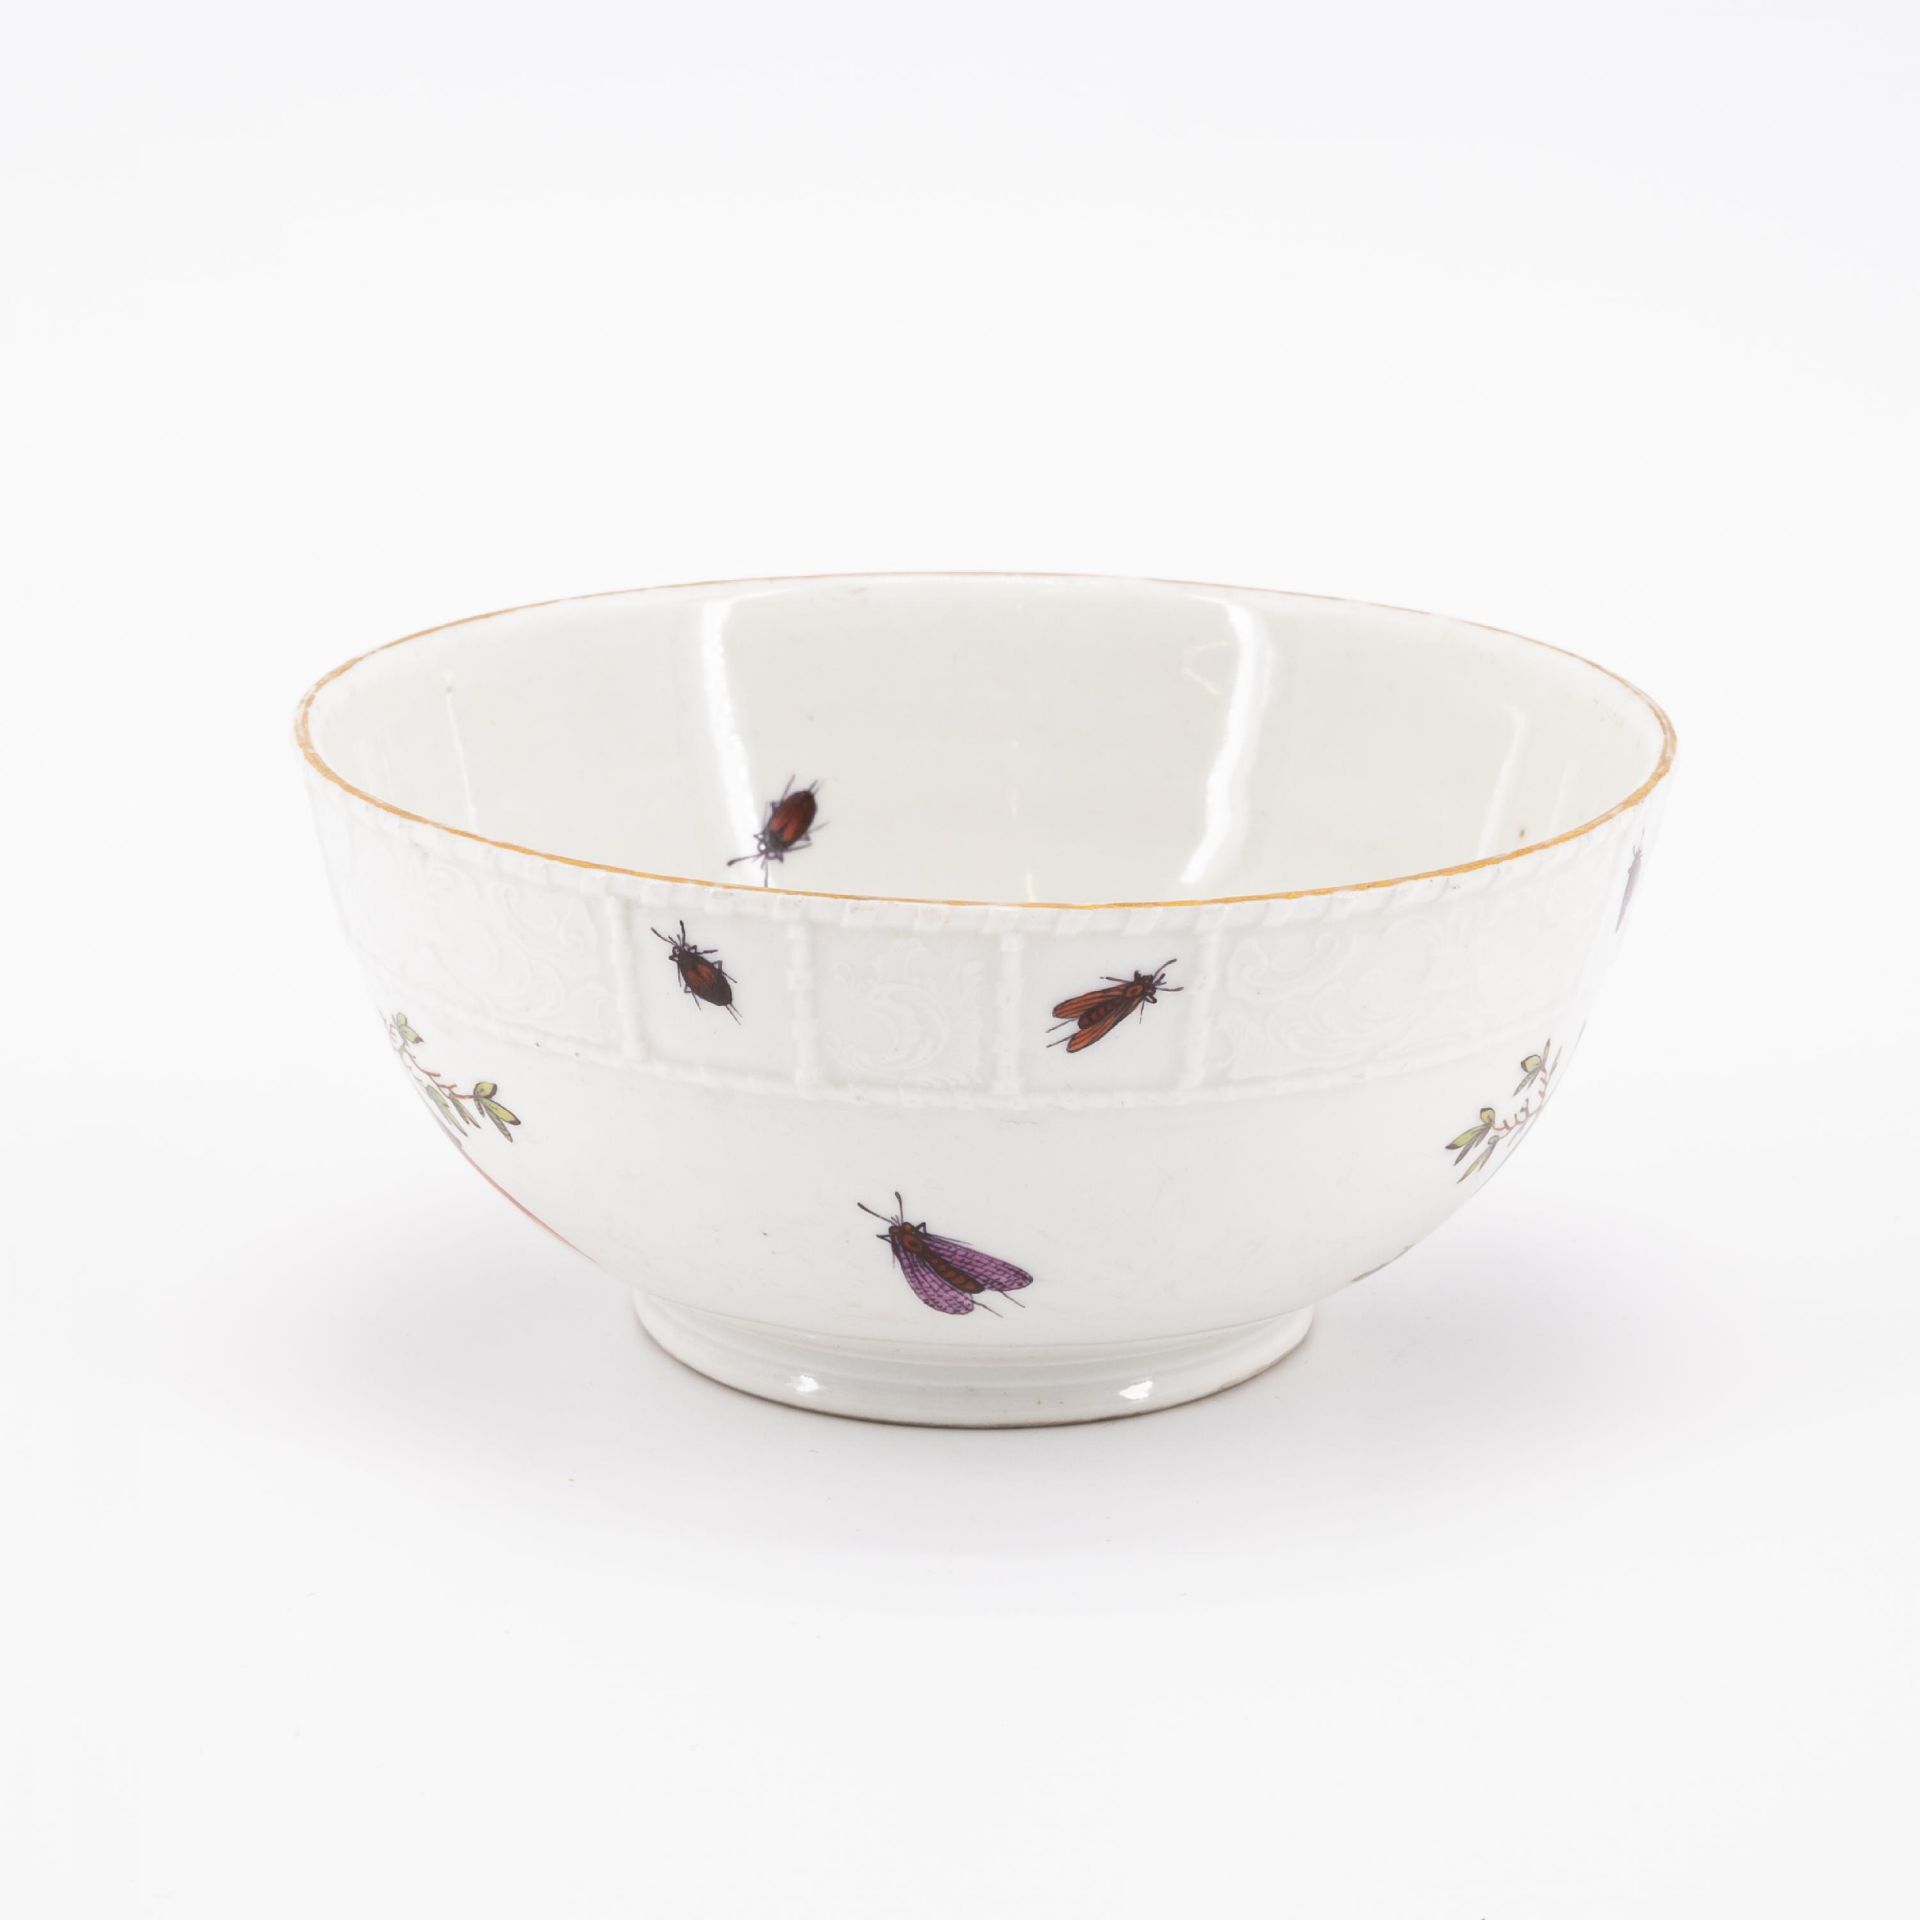 PORCELAIN SLOP BOWL, THREE CUPS AND SAUCERS WITH FIGURATIVE AND FLORAL DECOR - Image 20 of 22